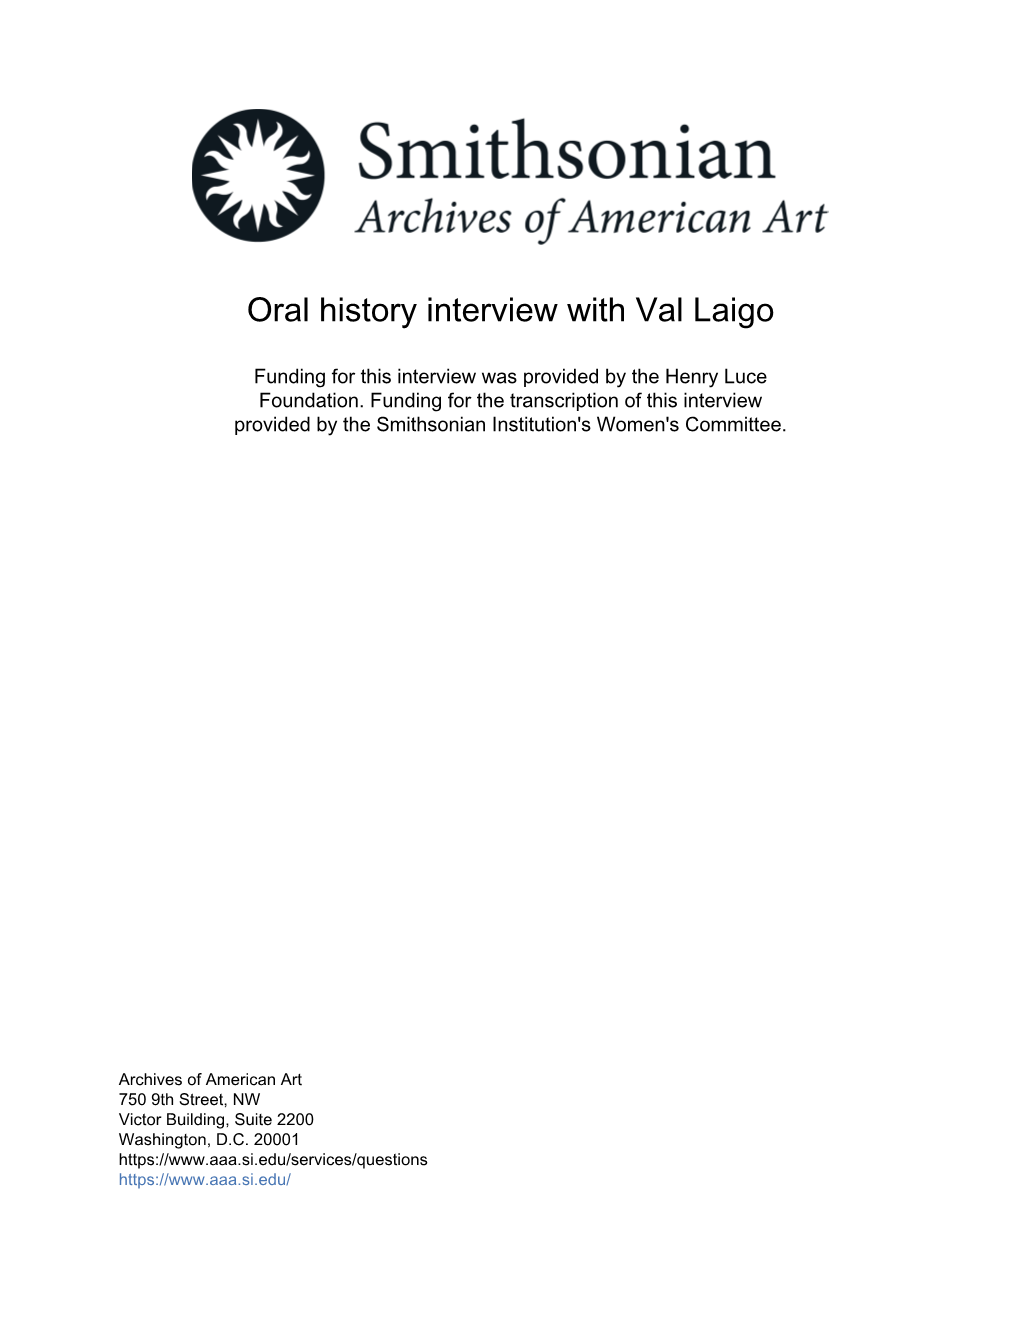 Oral History Interview with Val Laigo